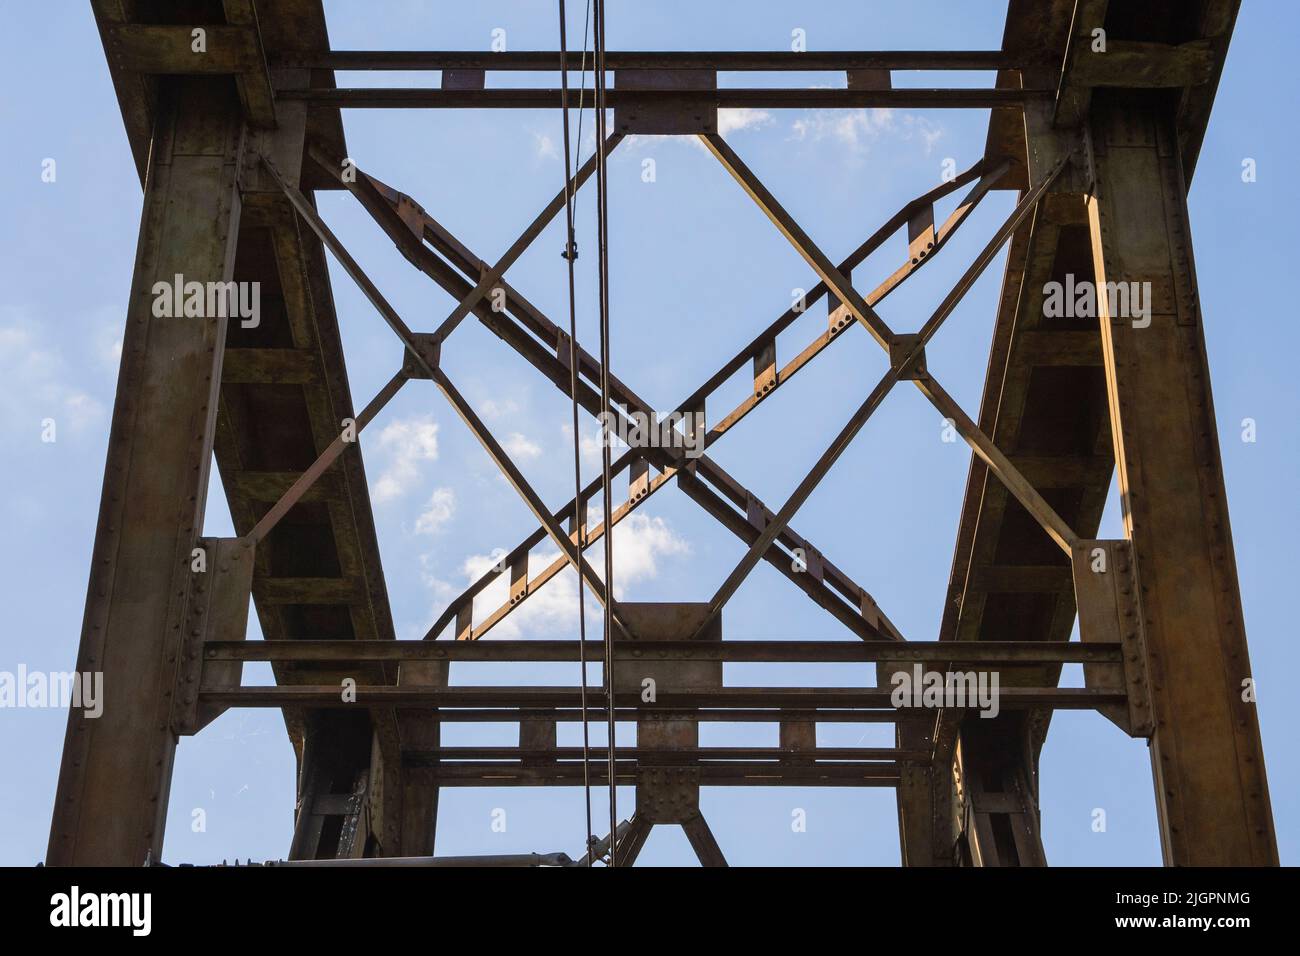 Railway viaduct against the sky and clouds in an unusual wide angle perspective. Stock Photo